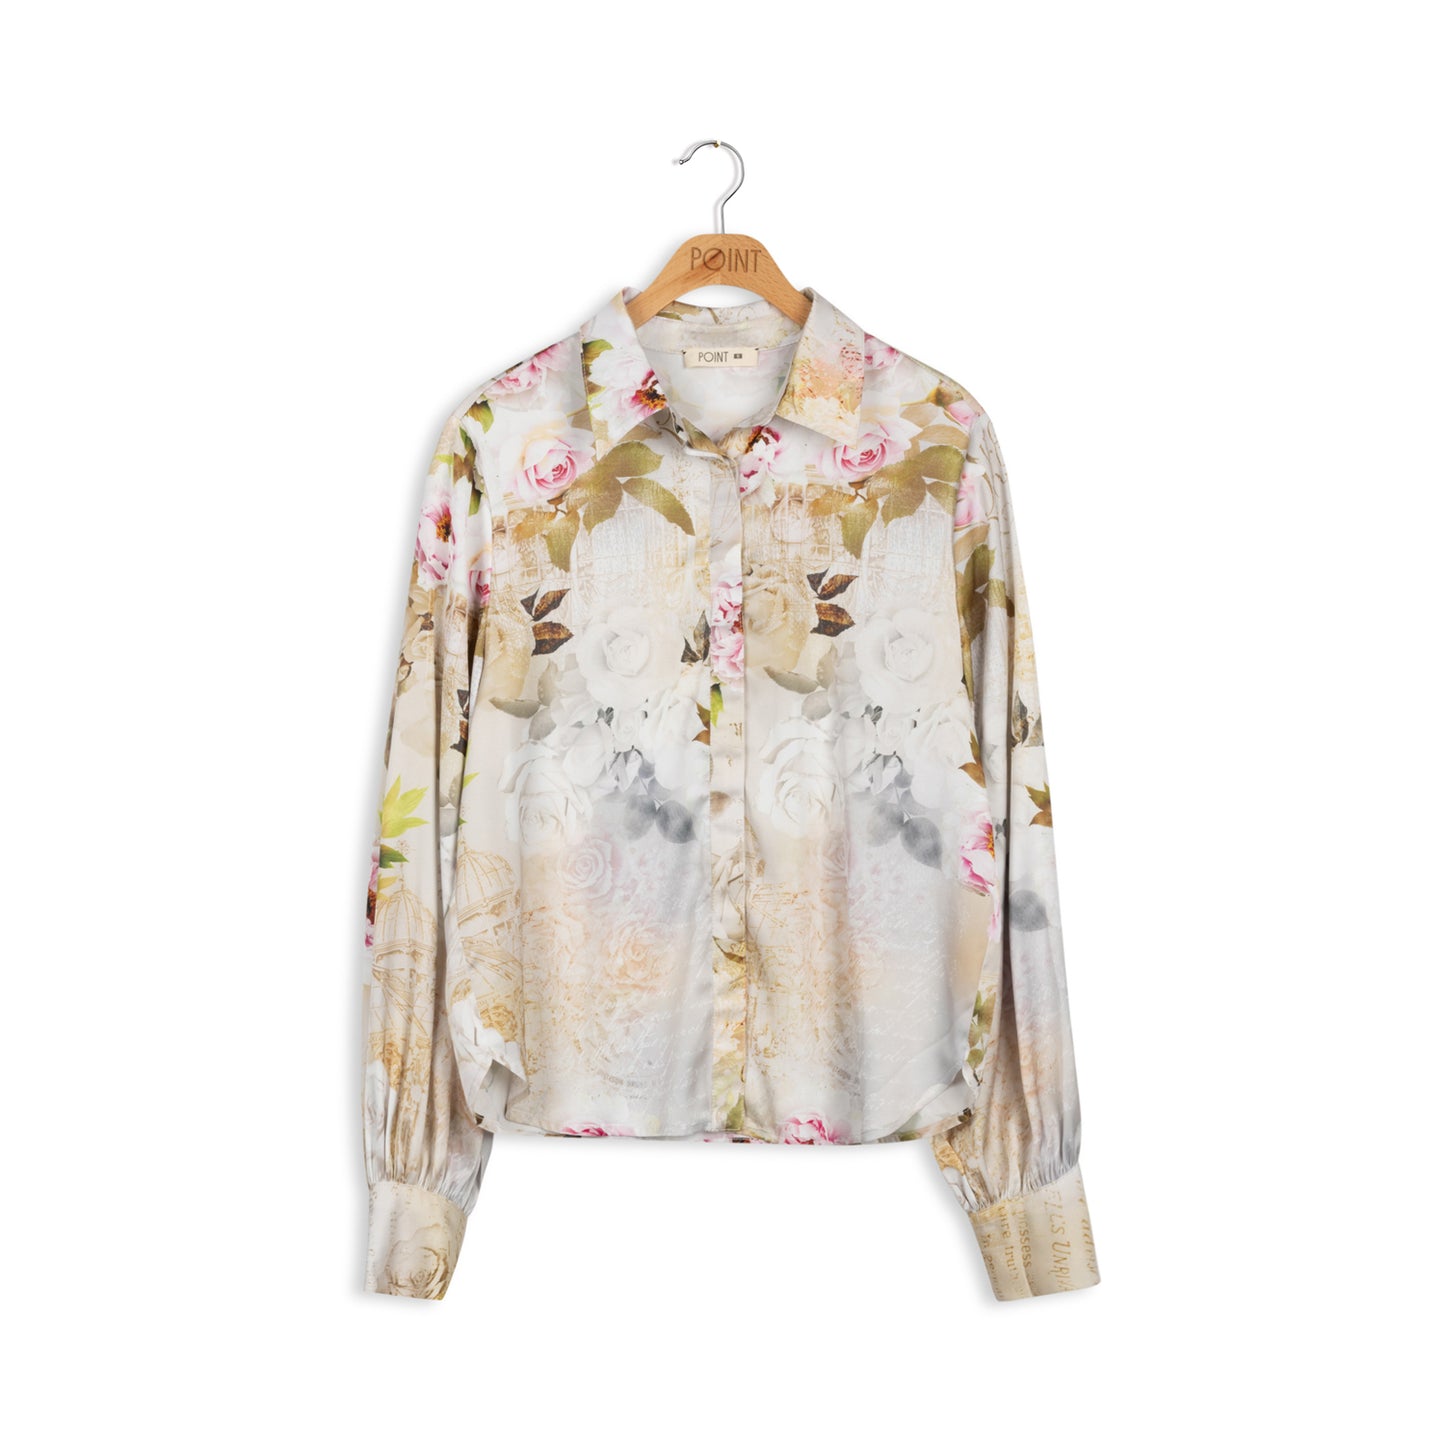 point printed satin blouse